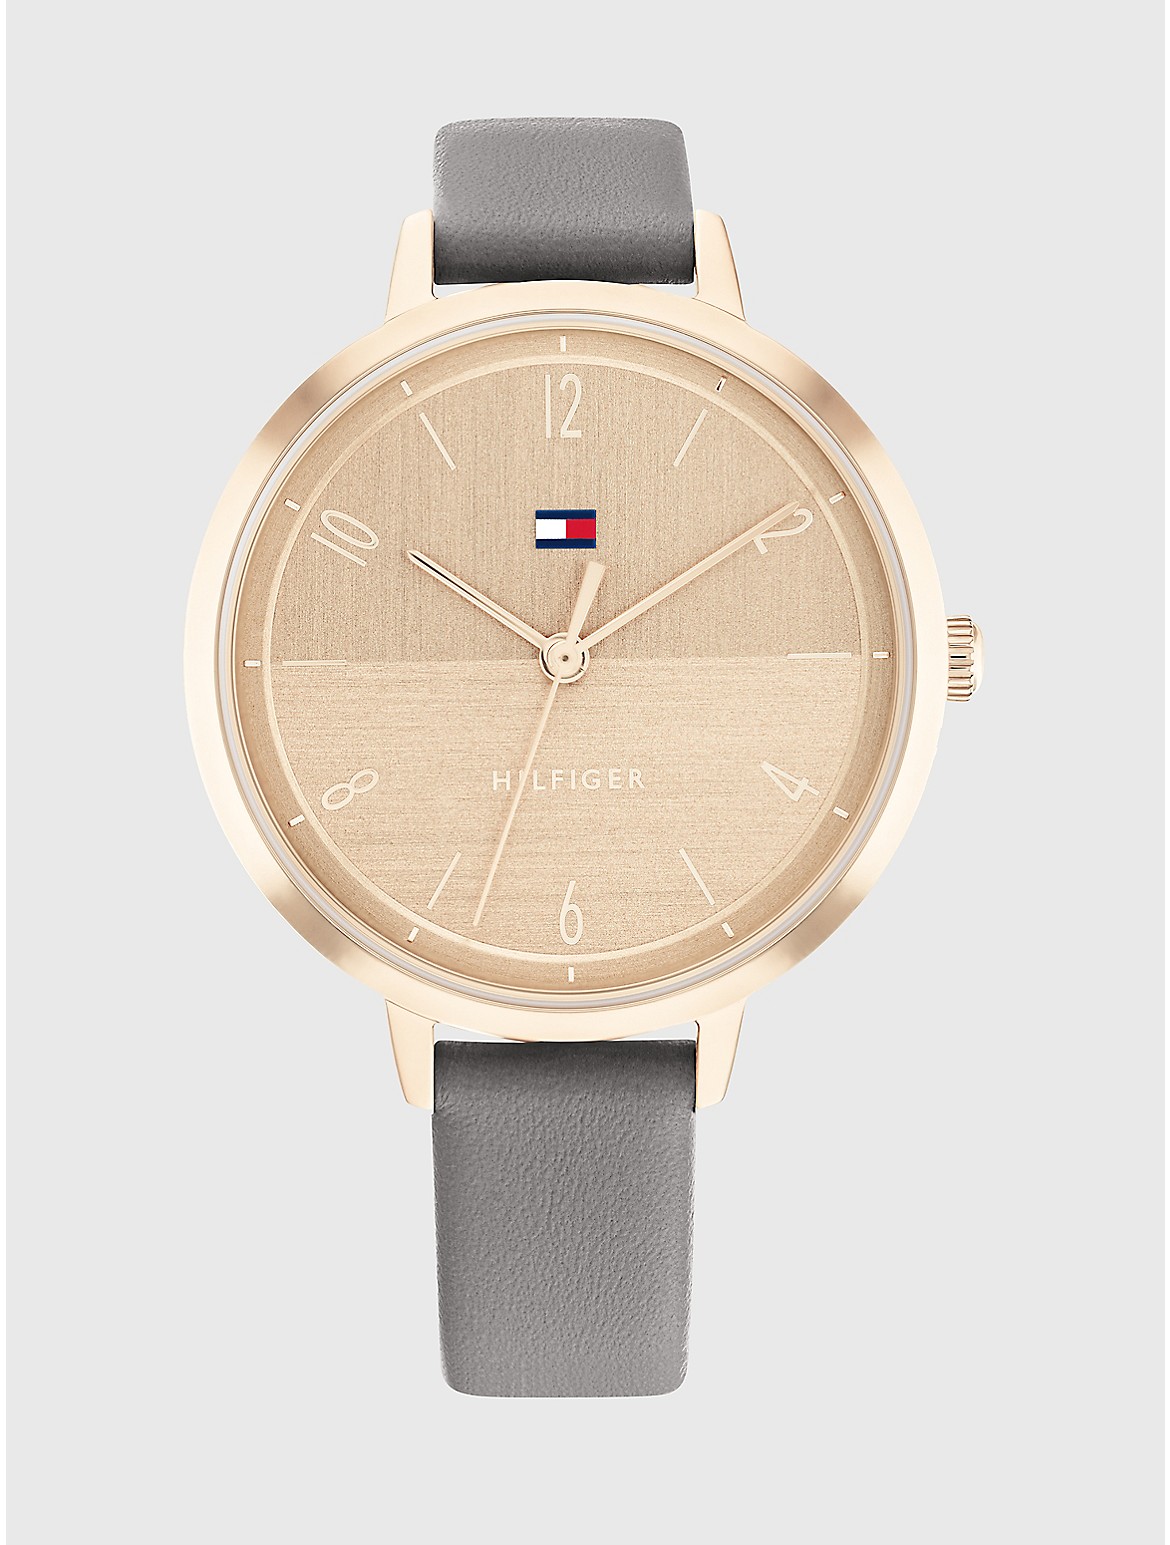 Tommy Hilfiger Women's Casual Watch with Gray Leather Strap - Metallic